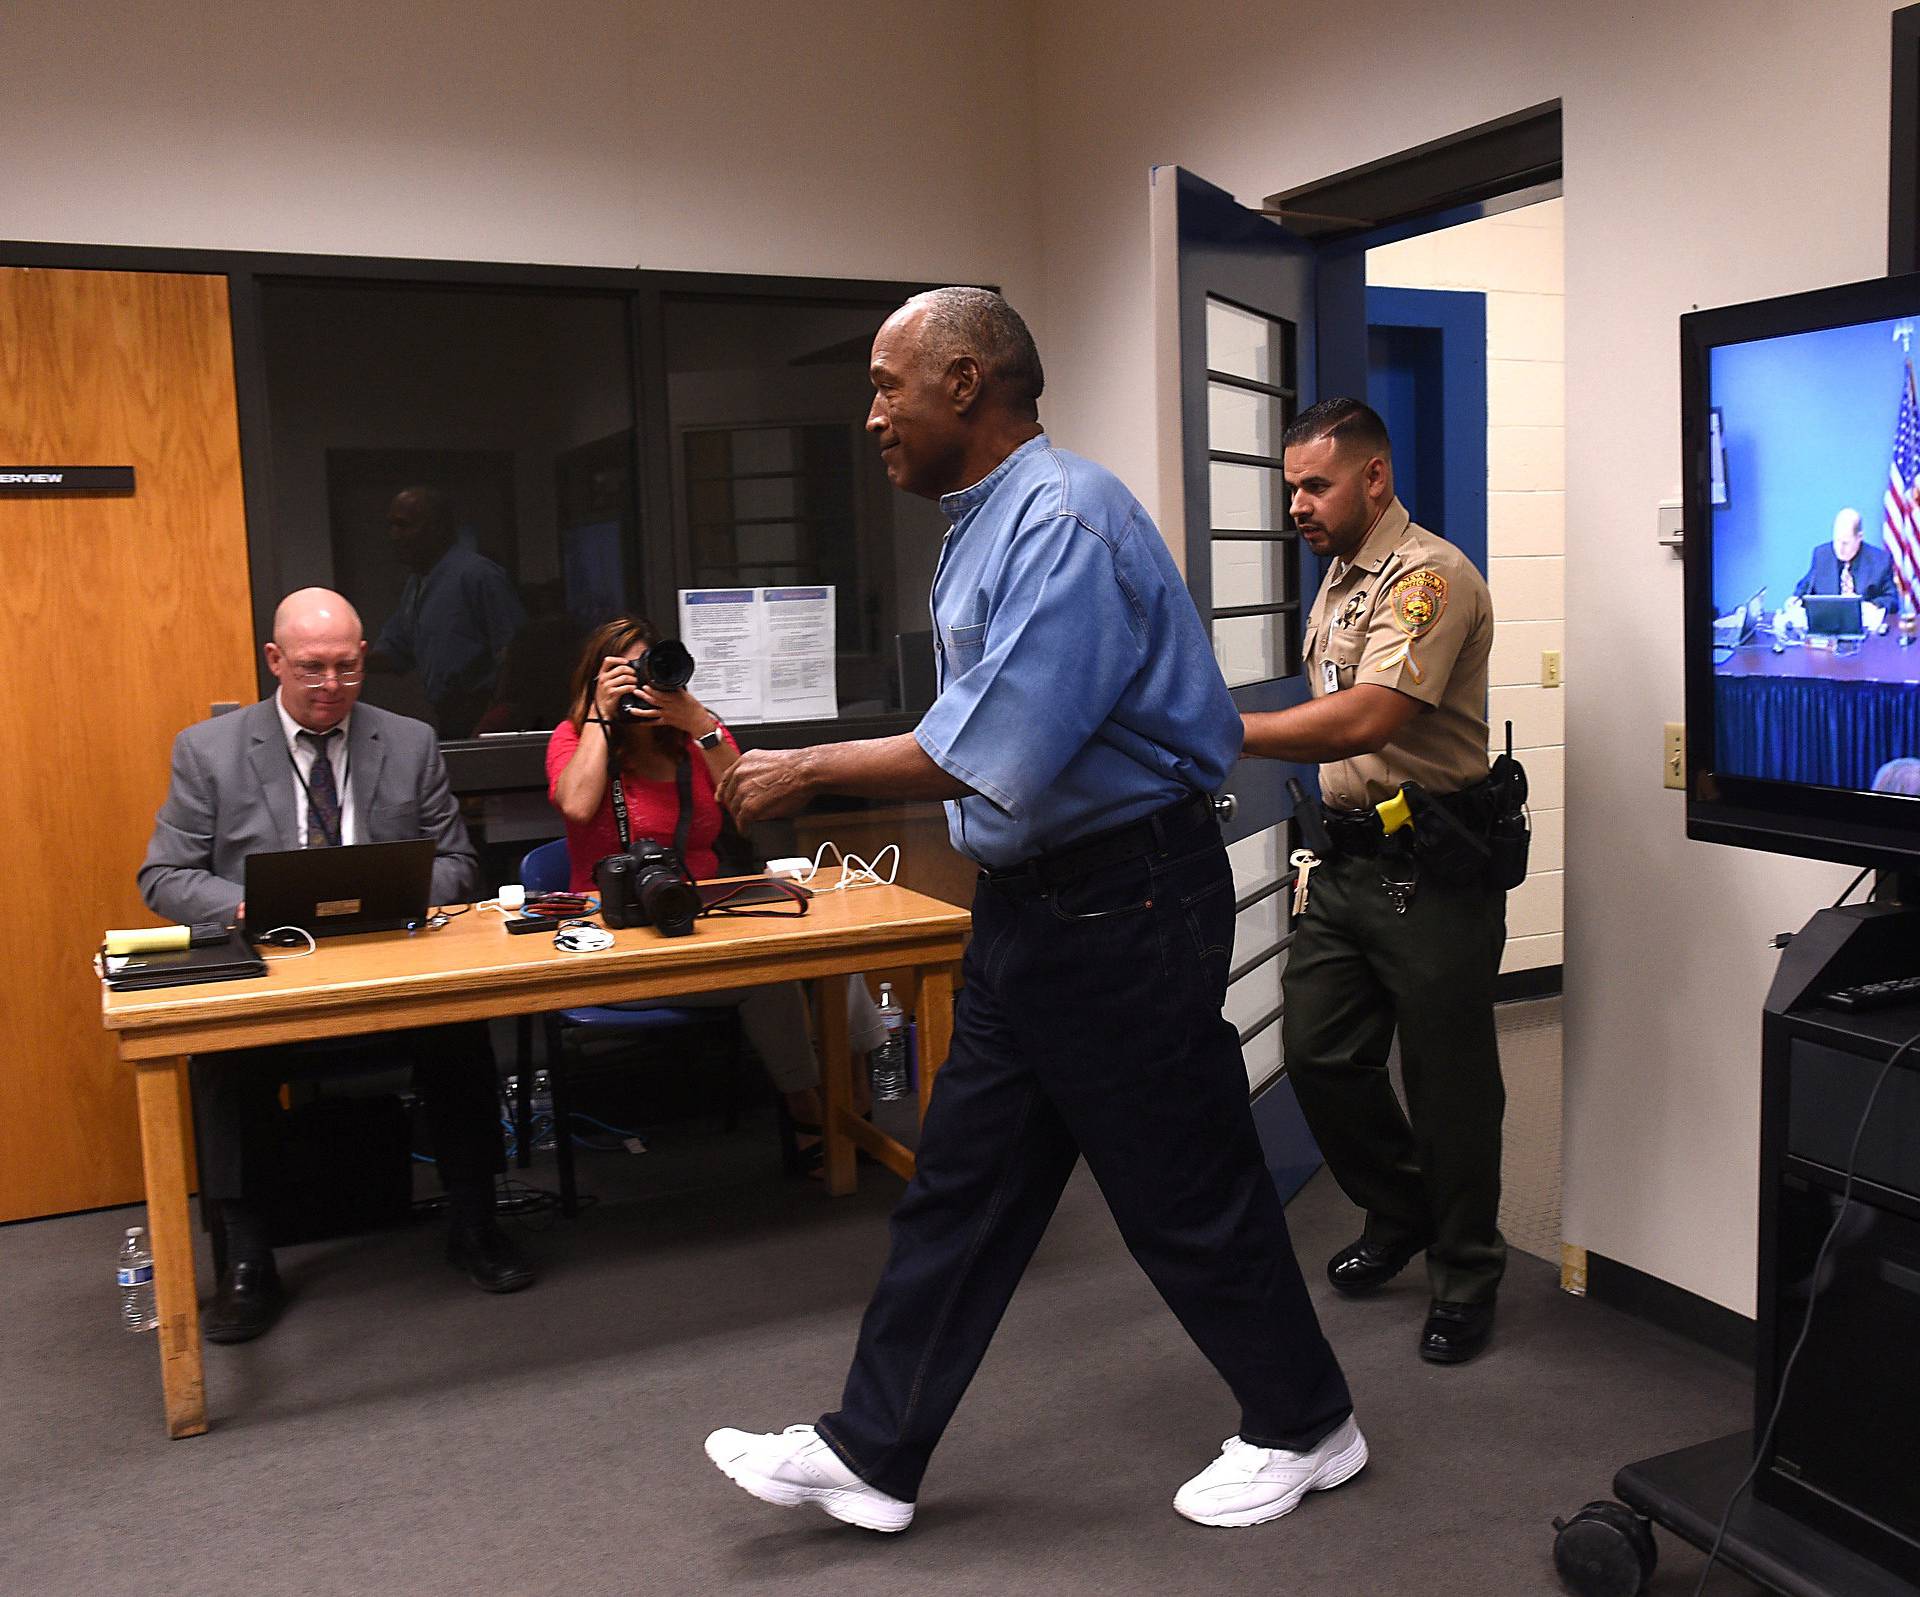 O.J. Simpson arrives for his parole hearing at Lovelock Correctional Centre in Lovelock